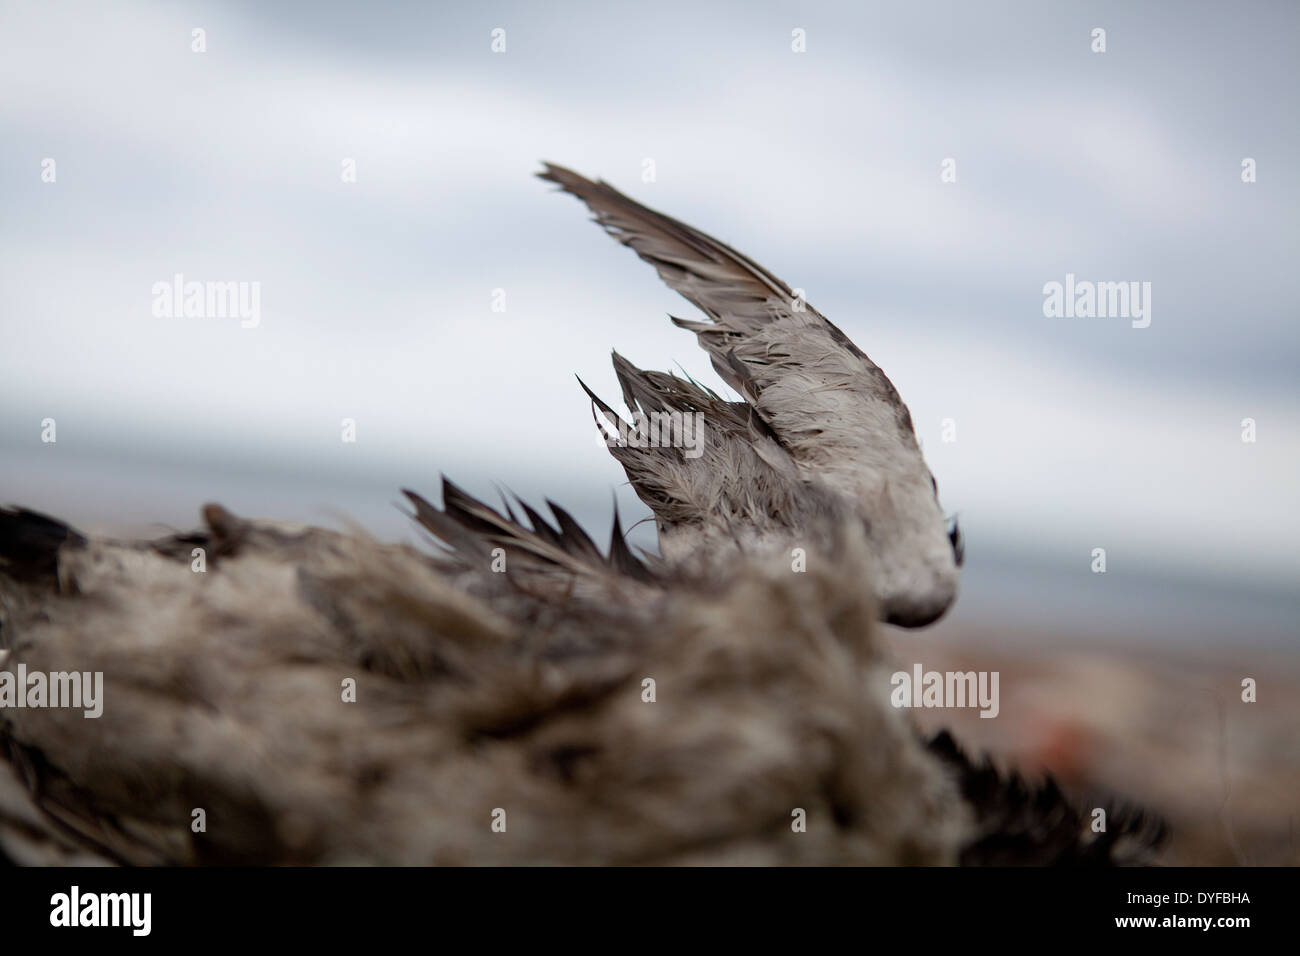 The wing of a dead sea bird lying on a beach Stock Photo